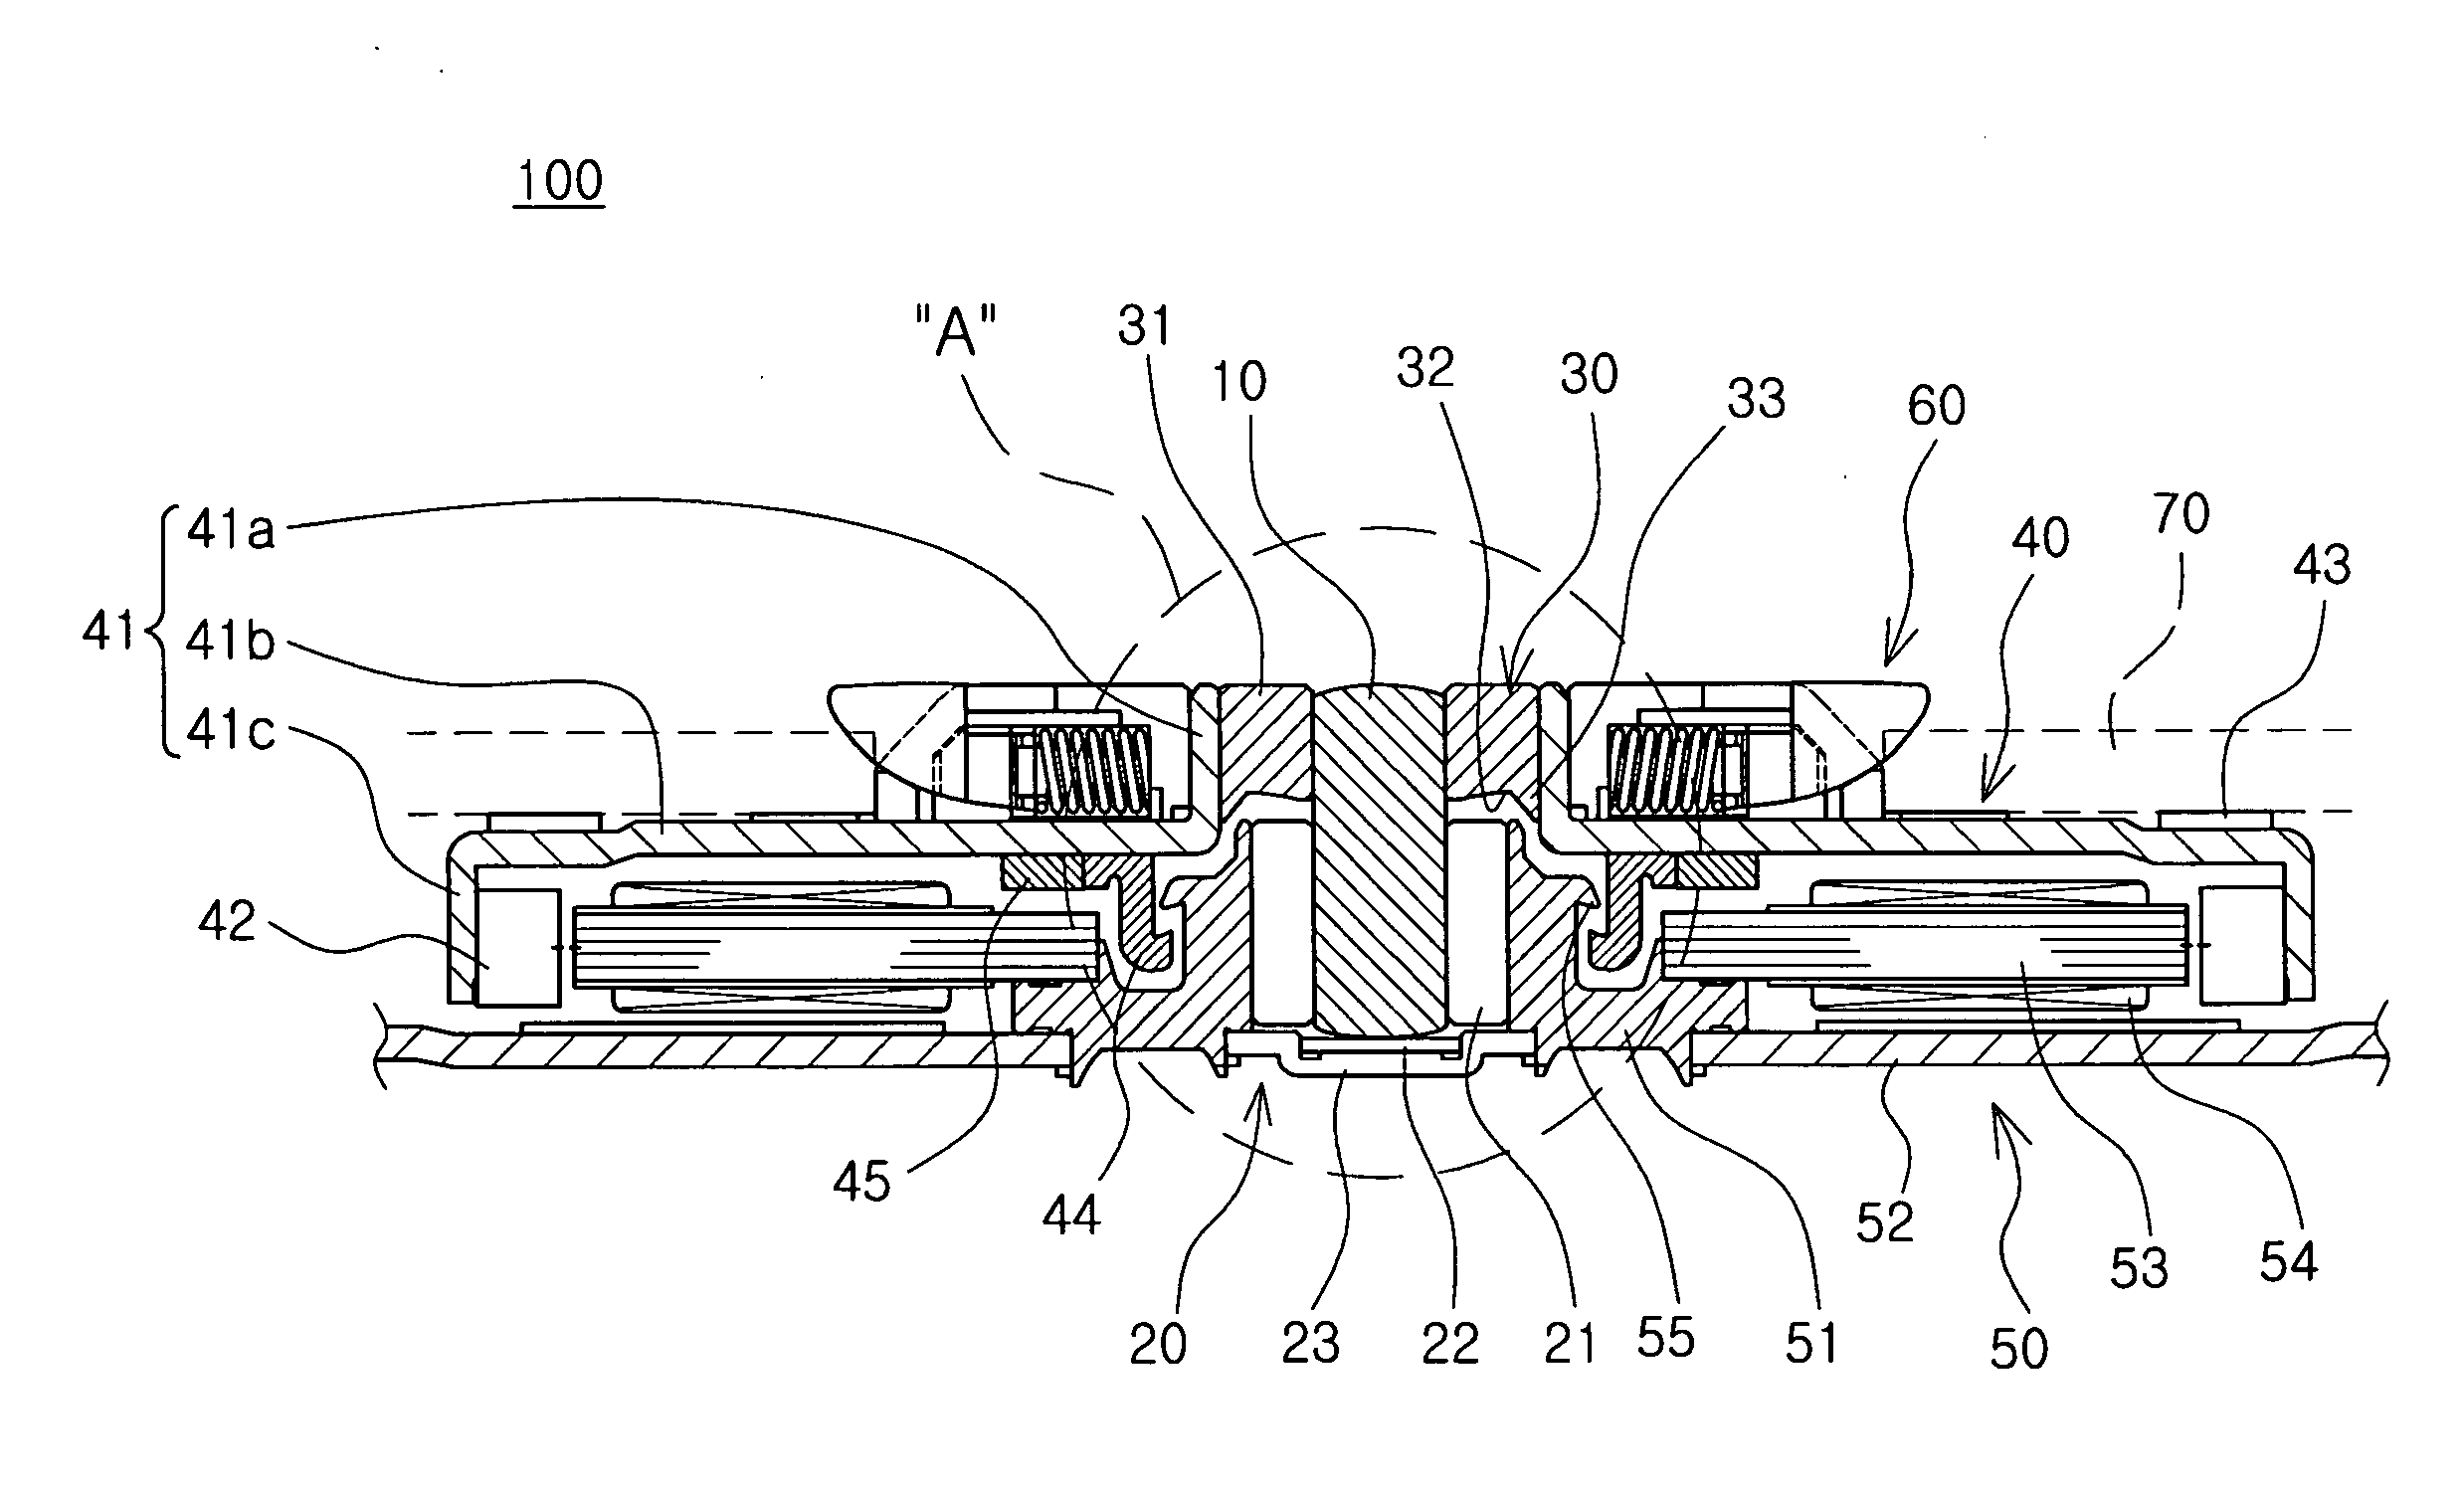 Spindle motor and disk driver having the same